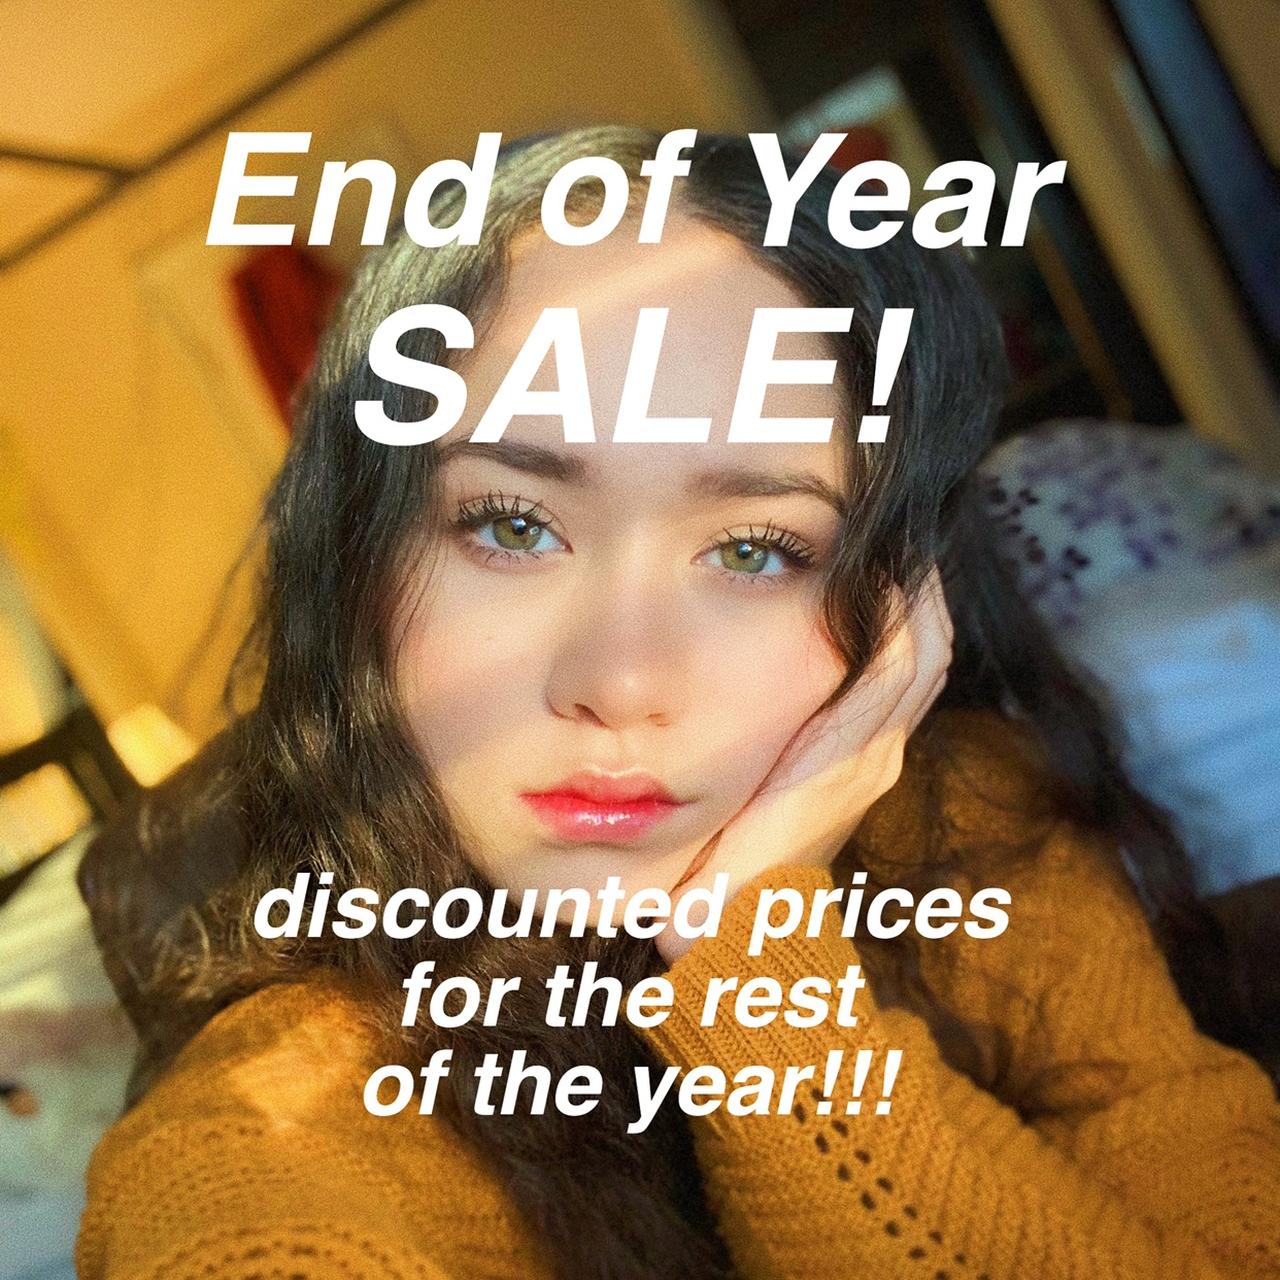 END OF THE YEAR SALE‼️ ‼️BUY NOW! PACKED & READY TO - Depop